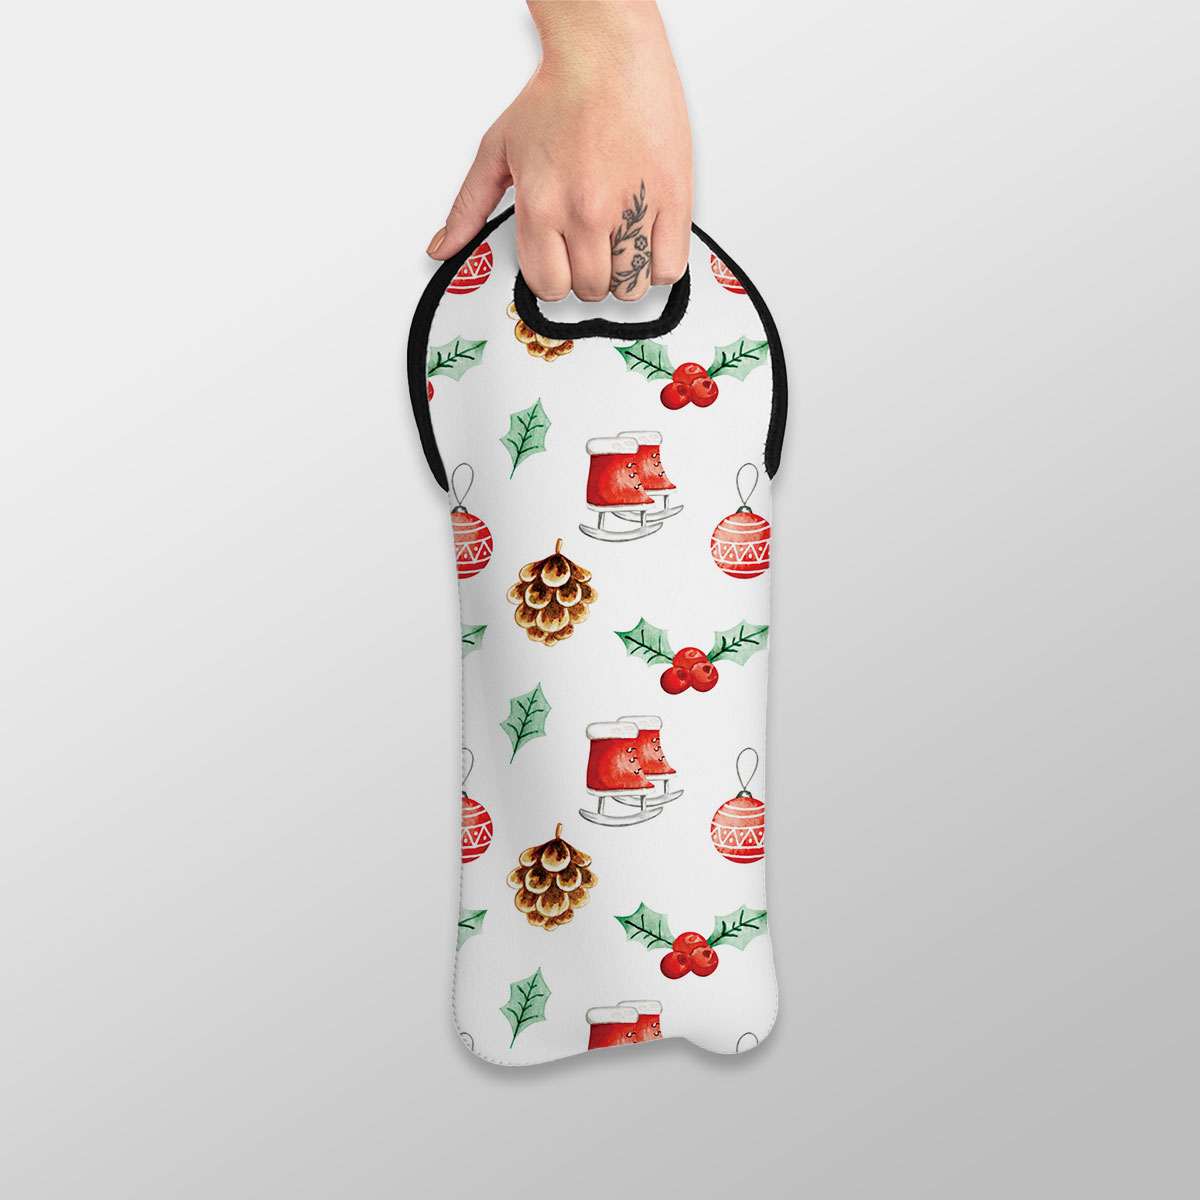 Ice Skates, Holly Leaf, Pine Cone And Christmas Baubles Wine Tote Bag